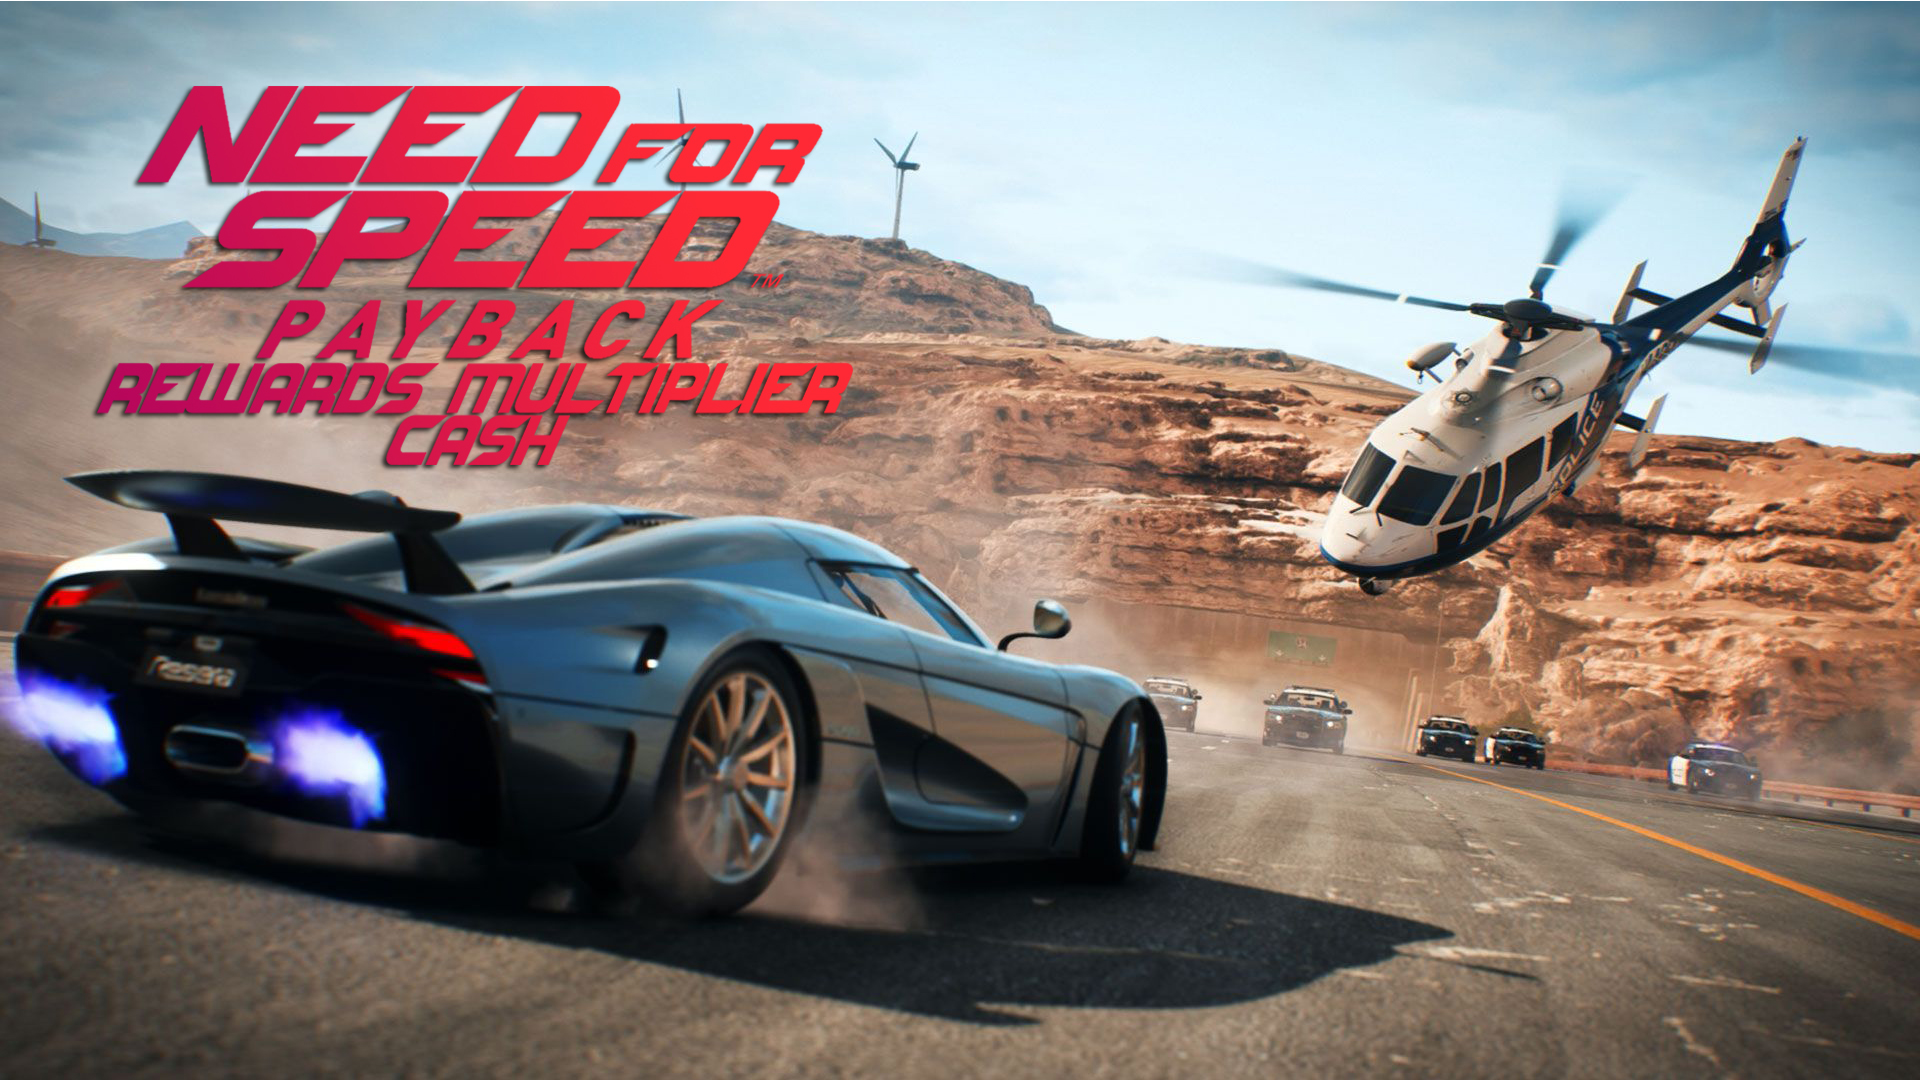 Need for speed playback. Need for Speed: Payback. Need for Speed Payback Deluxe Edition. Need for Speed Payback 2. NFS Payback 2020.